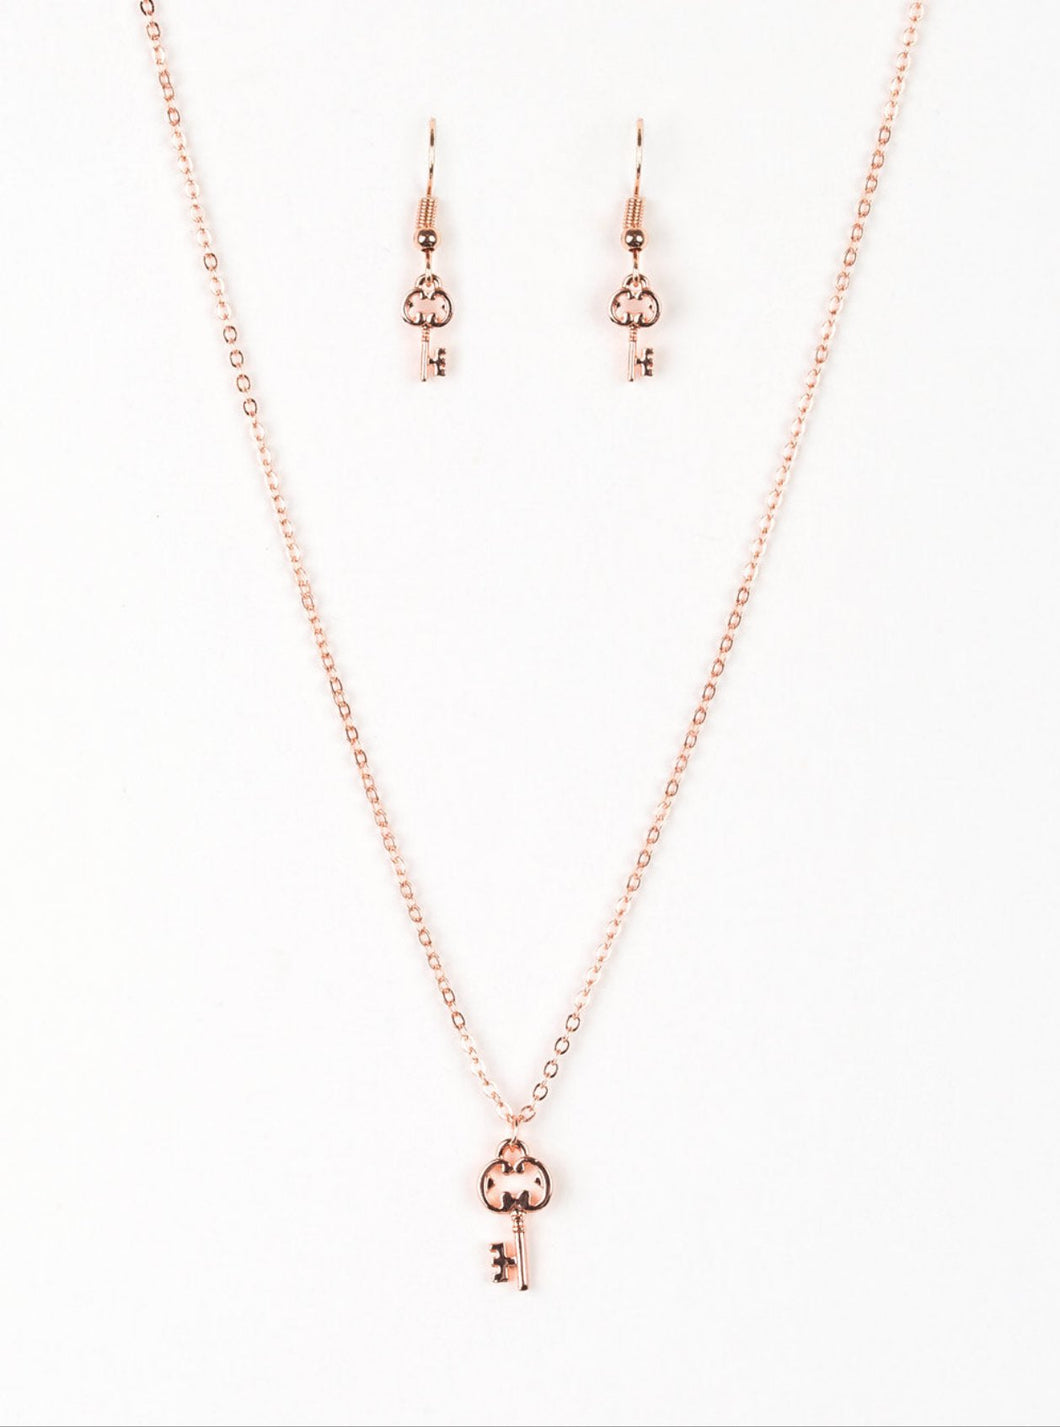 Very Low Key Copper Necklace and Earrings